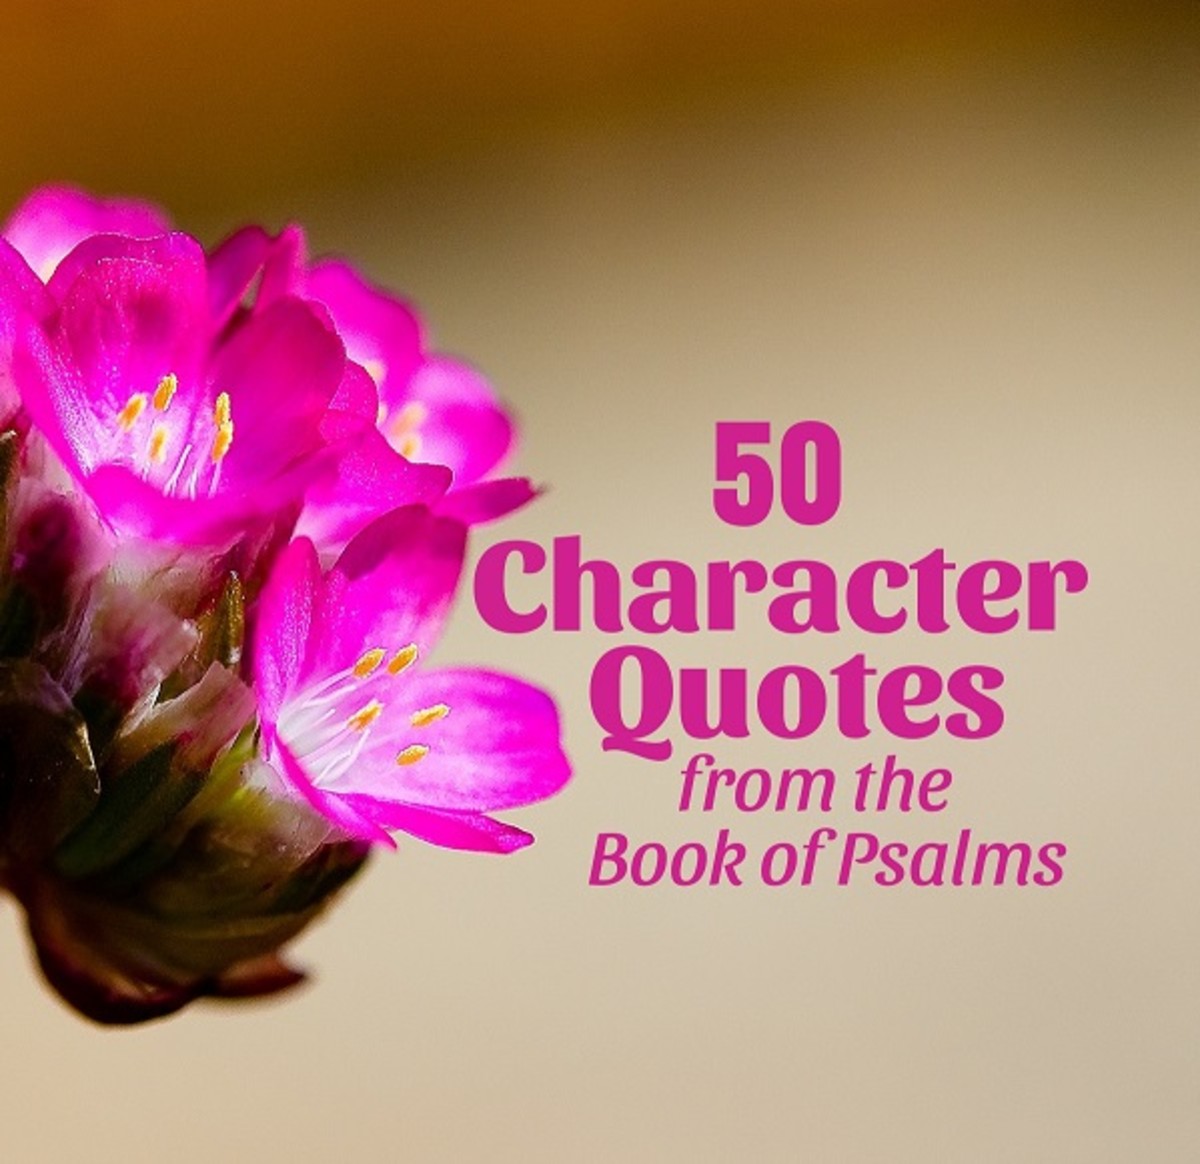 50 Character Quotes from the Book of Psalms